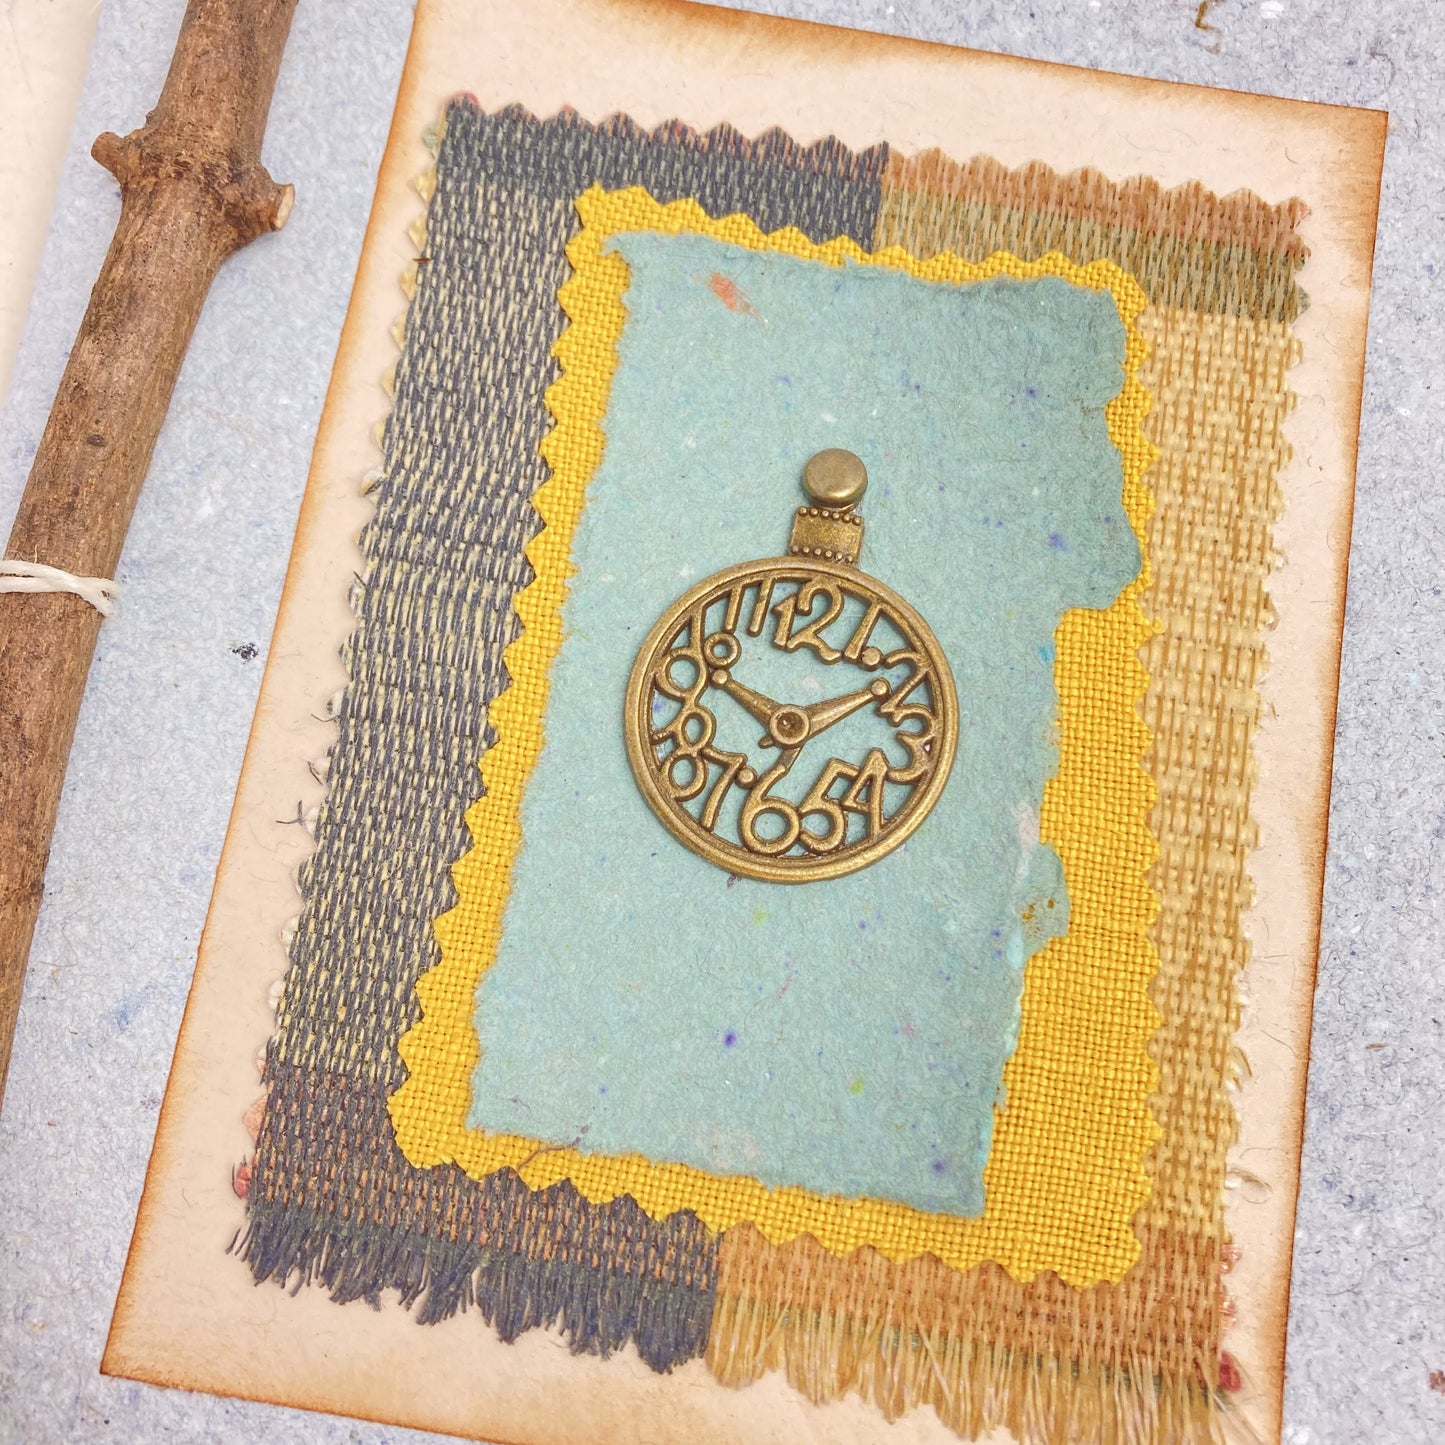 Art Journal with Handmade Paper Cover, Vintage-Style Brass Colored Clock on Cover, Mixed Media Pages, Hand Sewn Binding with Stick Inserted